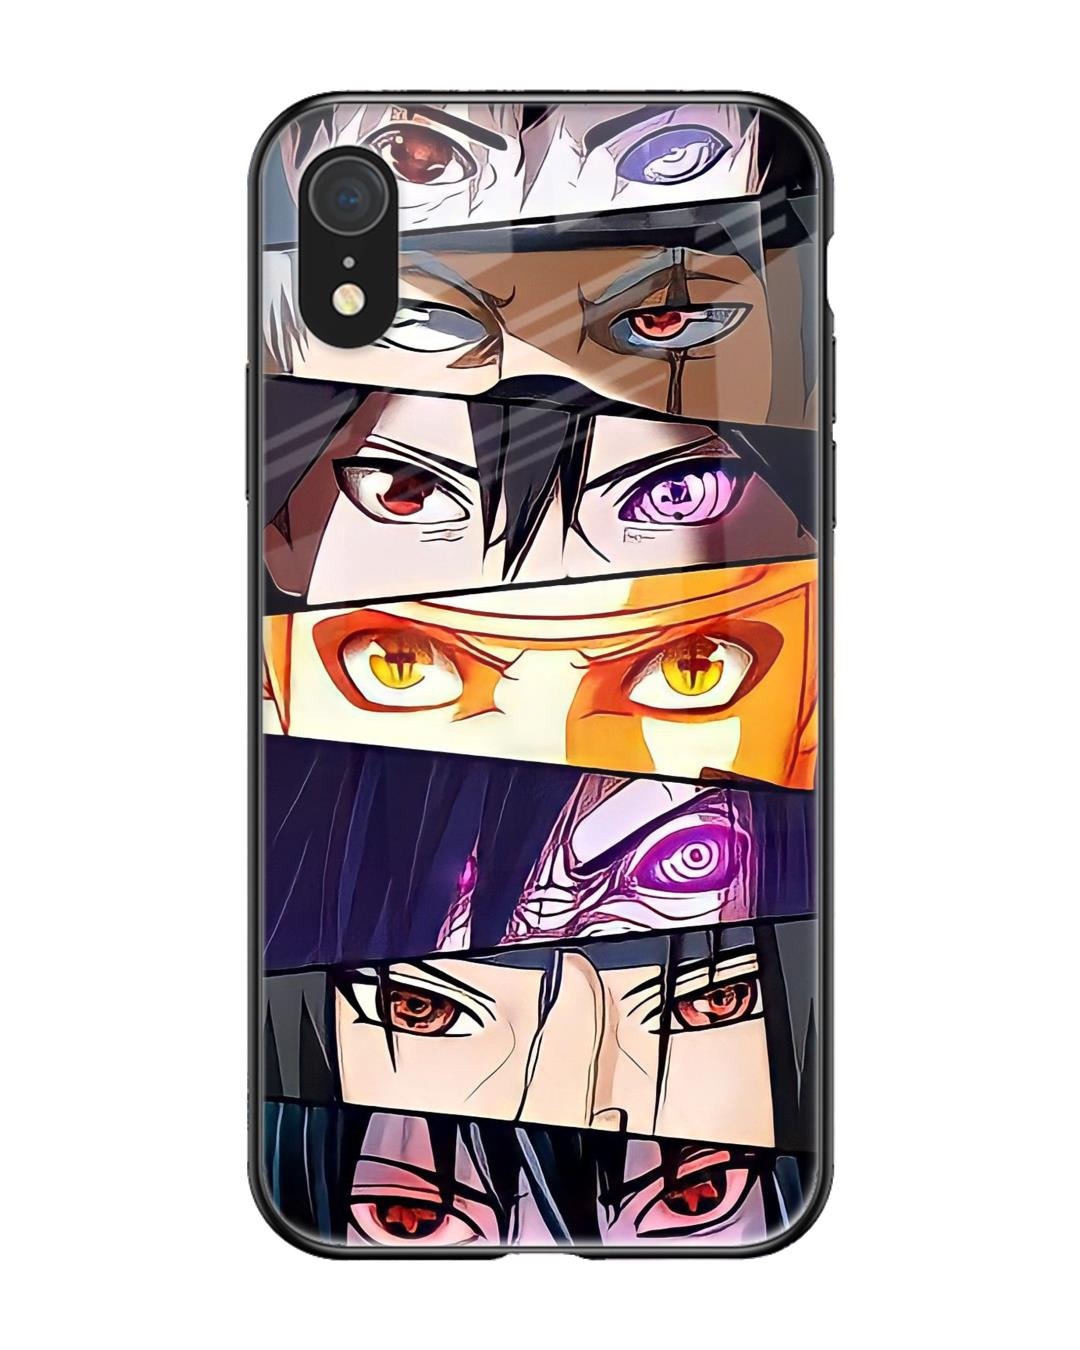 Buy Anime Sketch Premium Glass Case for Apple iPhone XR Shock  ProofScratch Resistant Online in India at Bewakoof